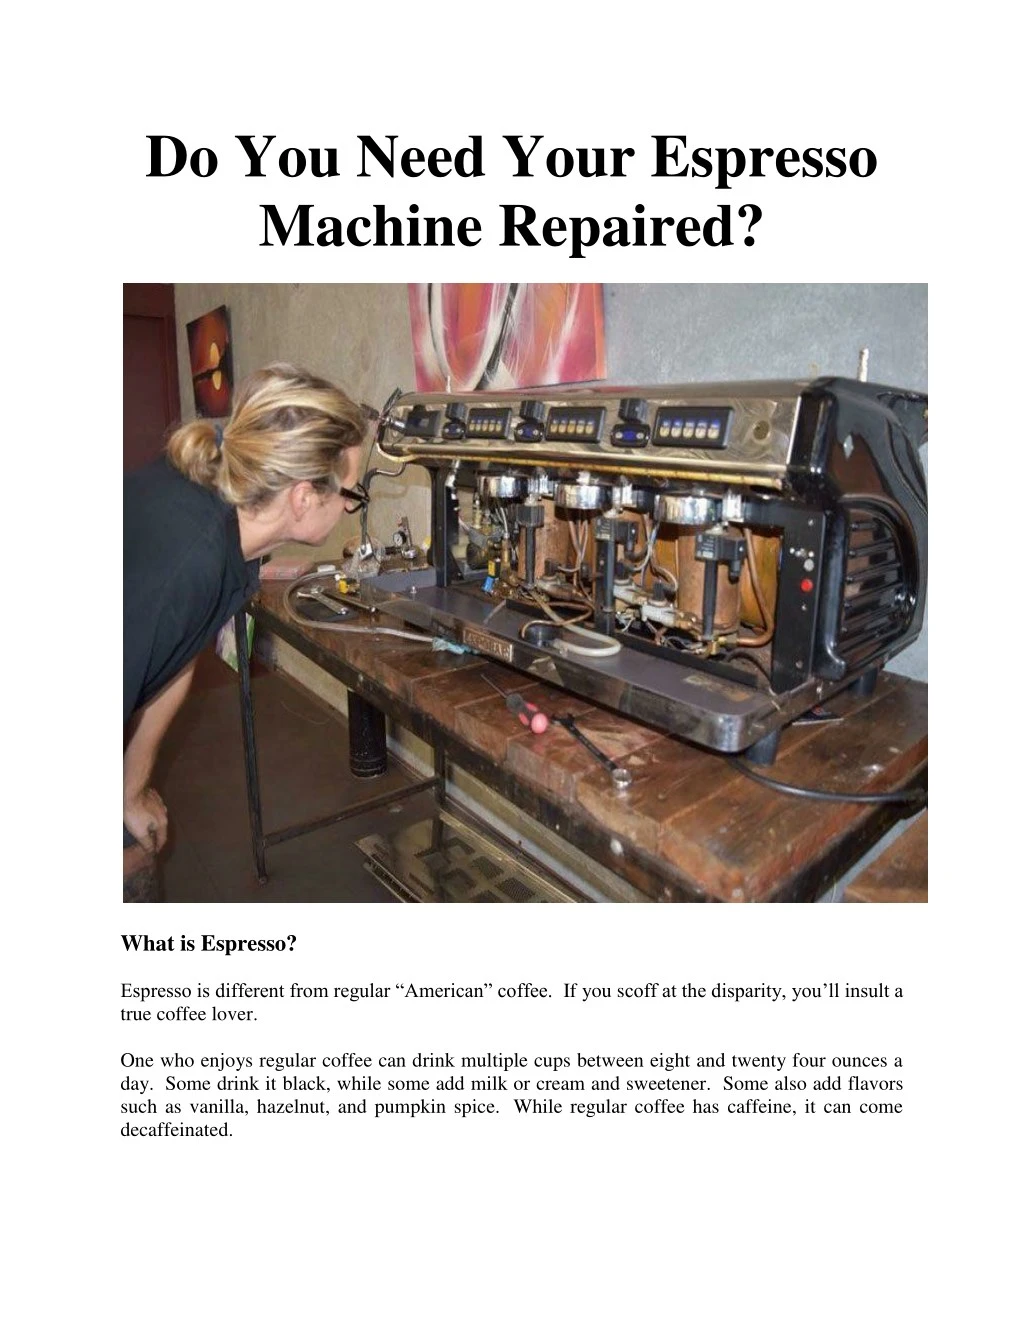 do you need your espresso machine repaired